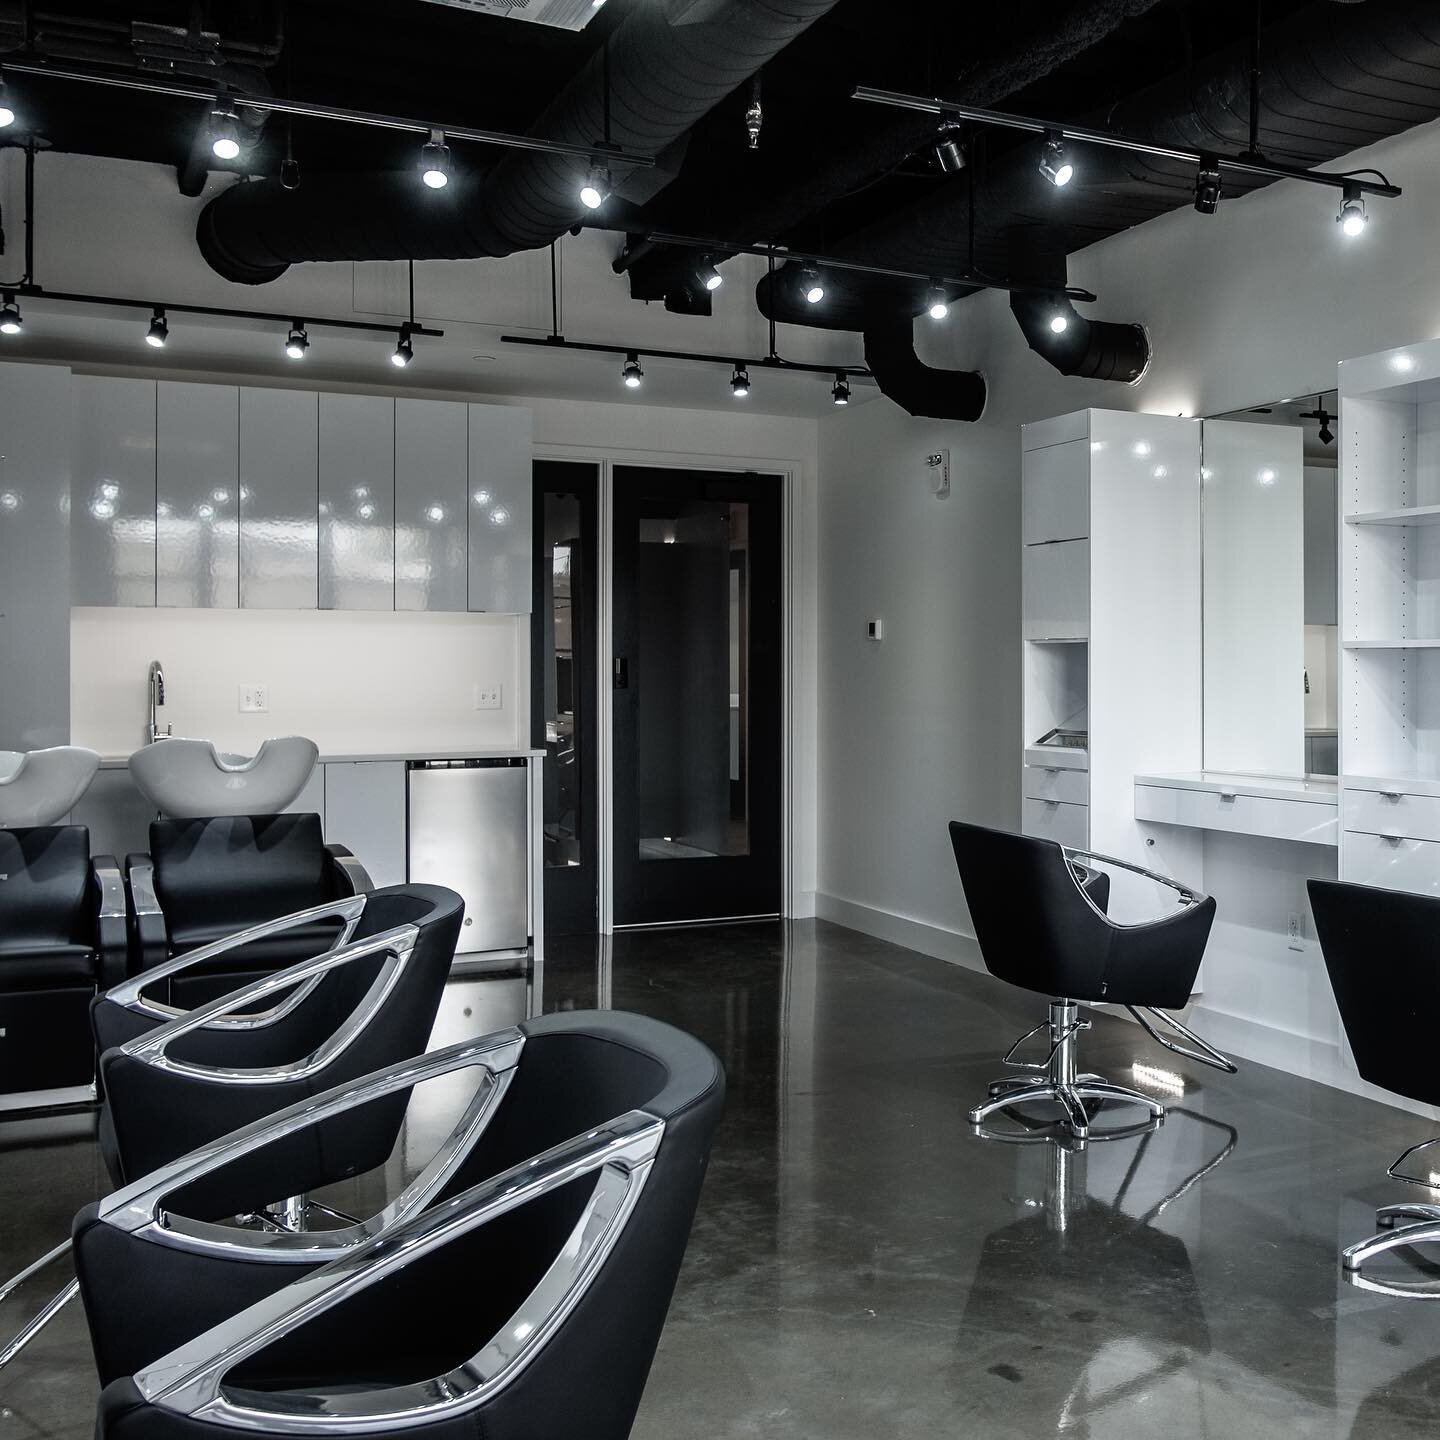 AREA 56 @ THE FACTORY opened on September 21, 2020 with 10 outstanding, new salon businesses. We are thrilled to welcome these talented salon entrepreneurs and encourage you to check them out, info below. Thank you to all those who helped us with thi